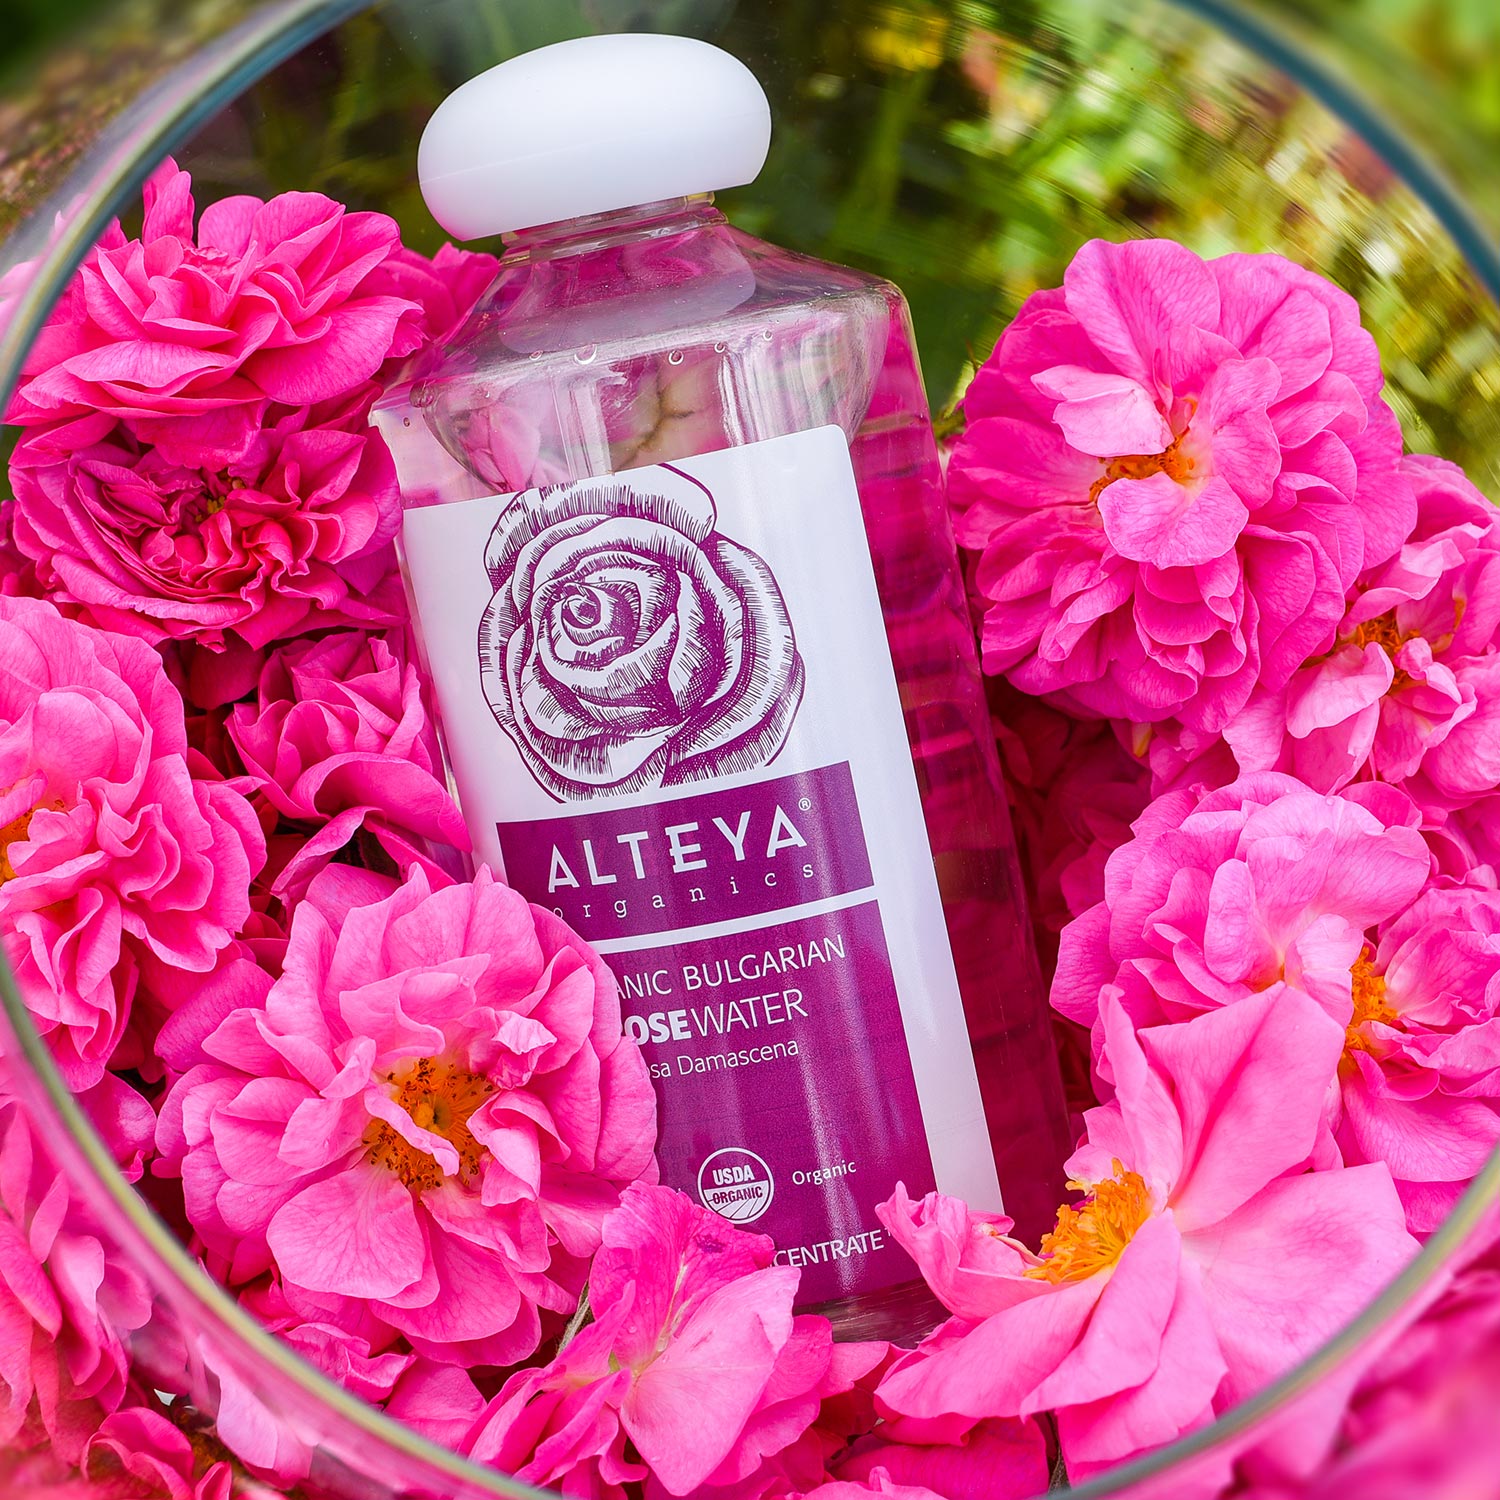 A bottle of Organic Bulgarian Rose Water - 8.5 Fl Oz by Alteya Organics surrounded by pink flowers, providing hydration for skincare.